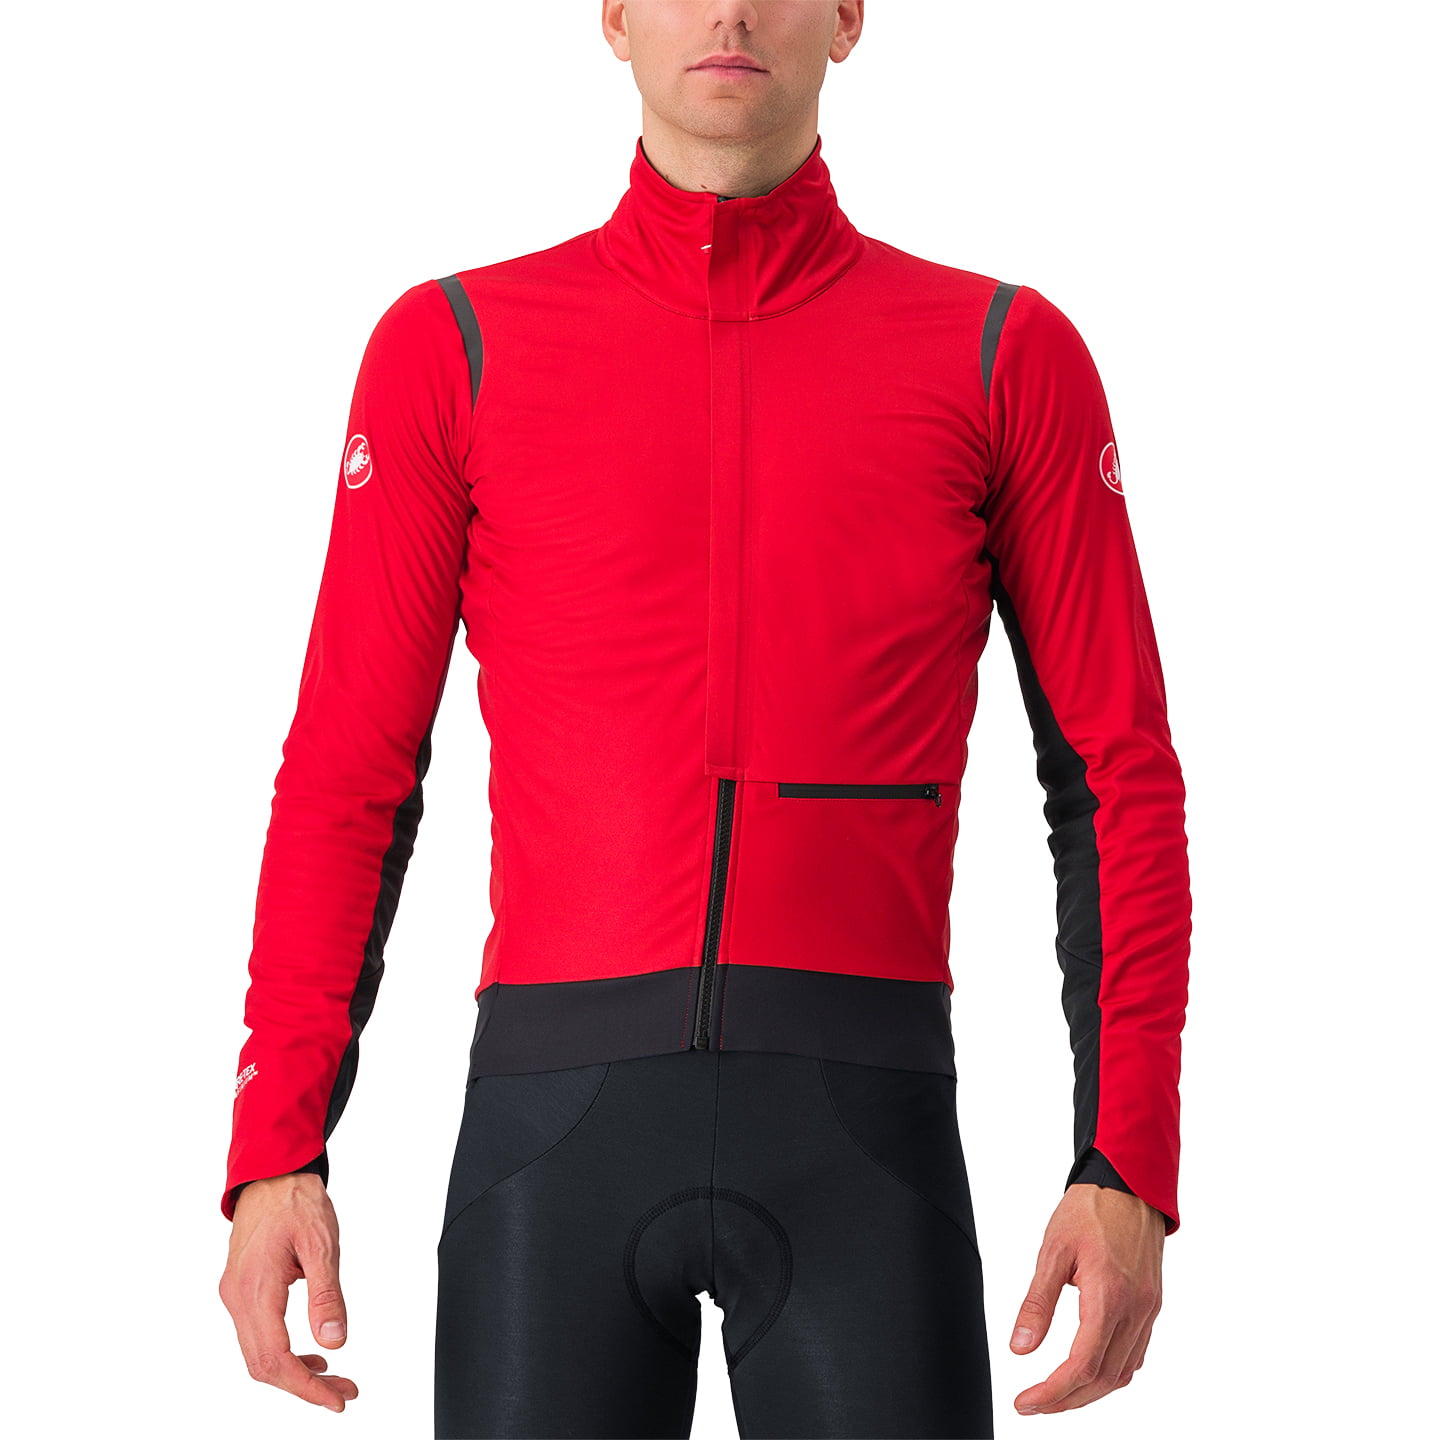 CASTELLI Winter Jacket Alpha Doppio RoS Thermal Jacket, for men, size 2XL, Winter jacket, Cycling clothing